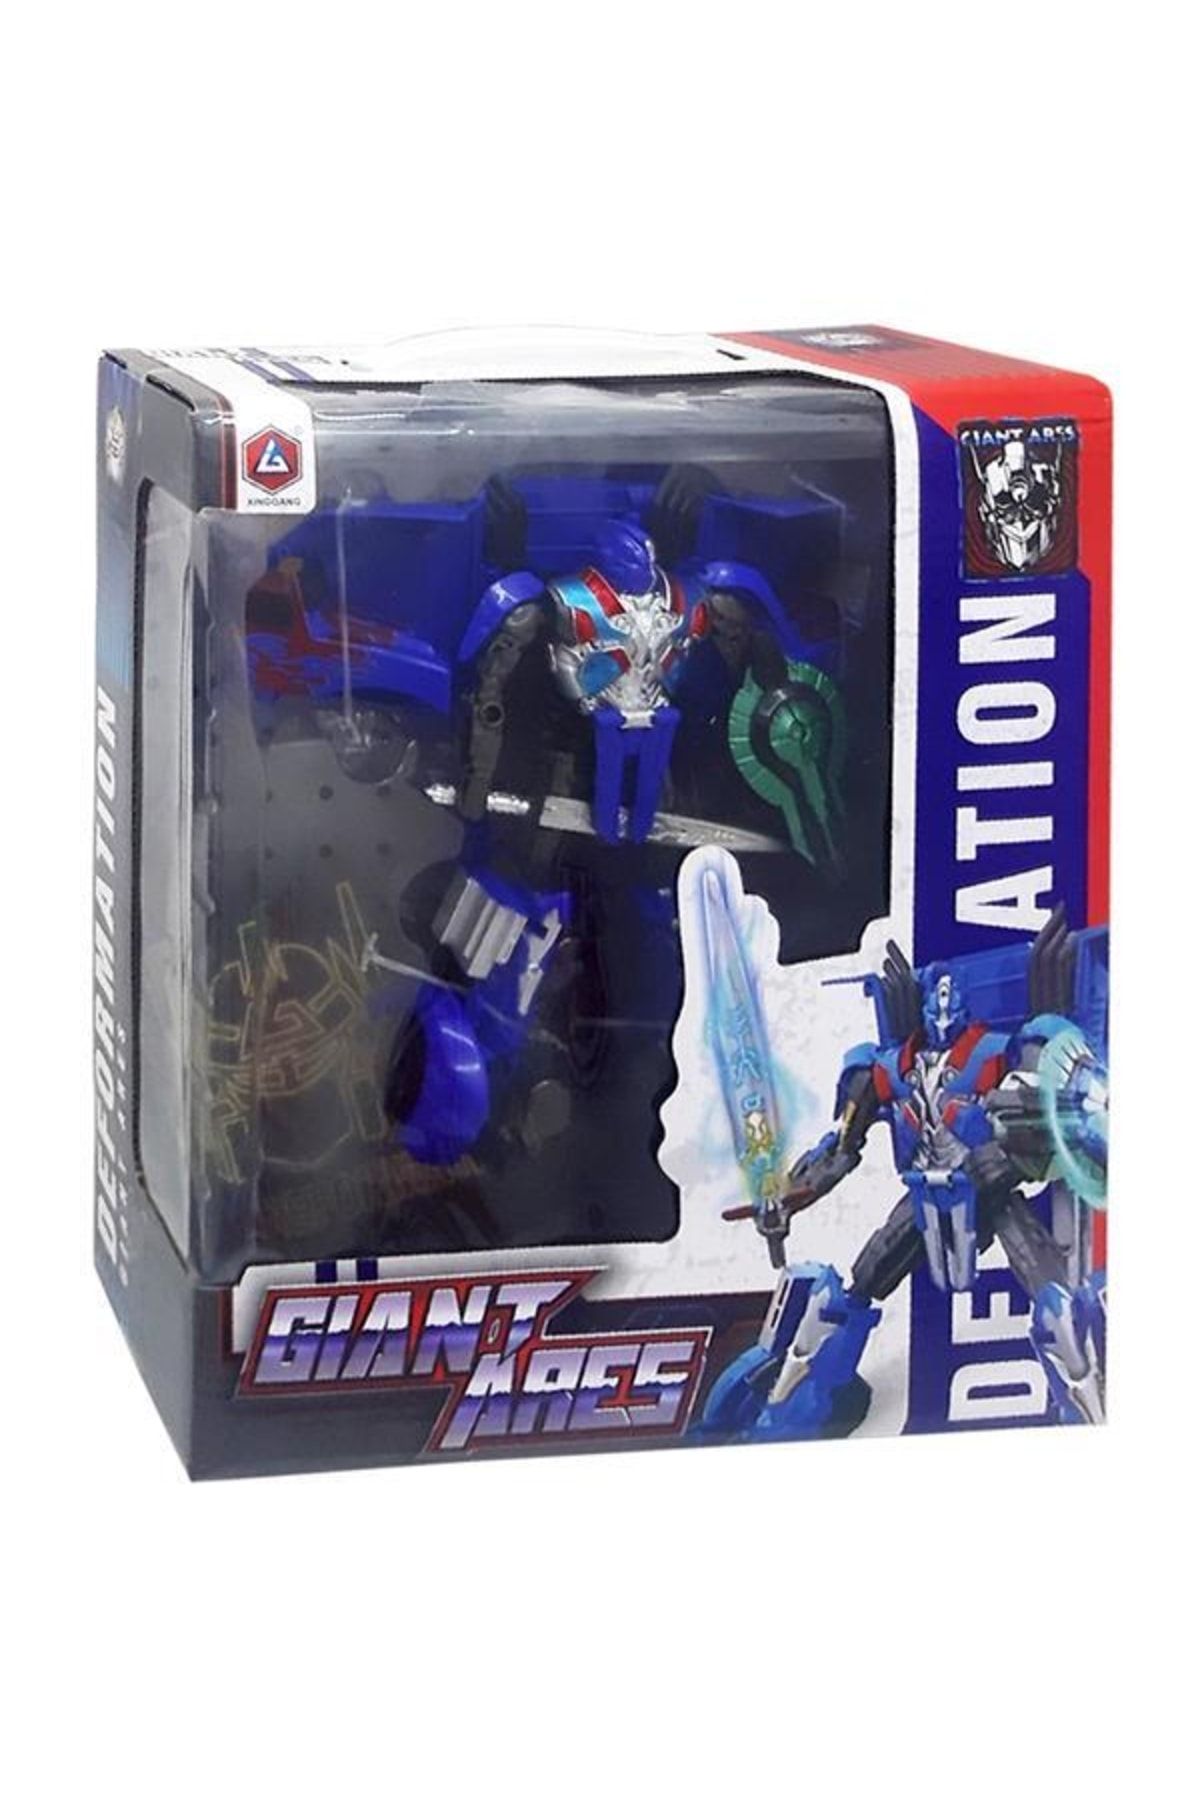 Can Toys Can Oyuncak Transformers Hd34 (17 60)